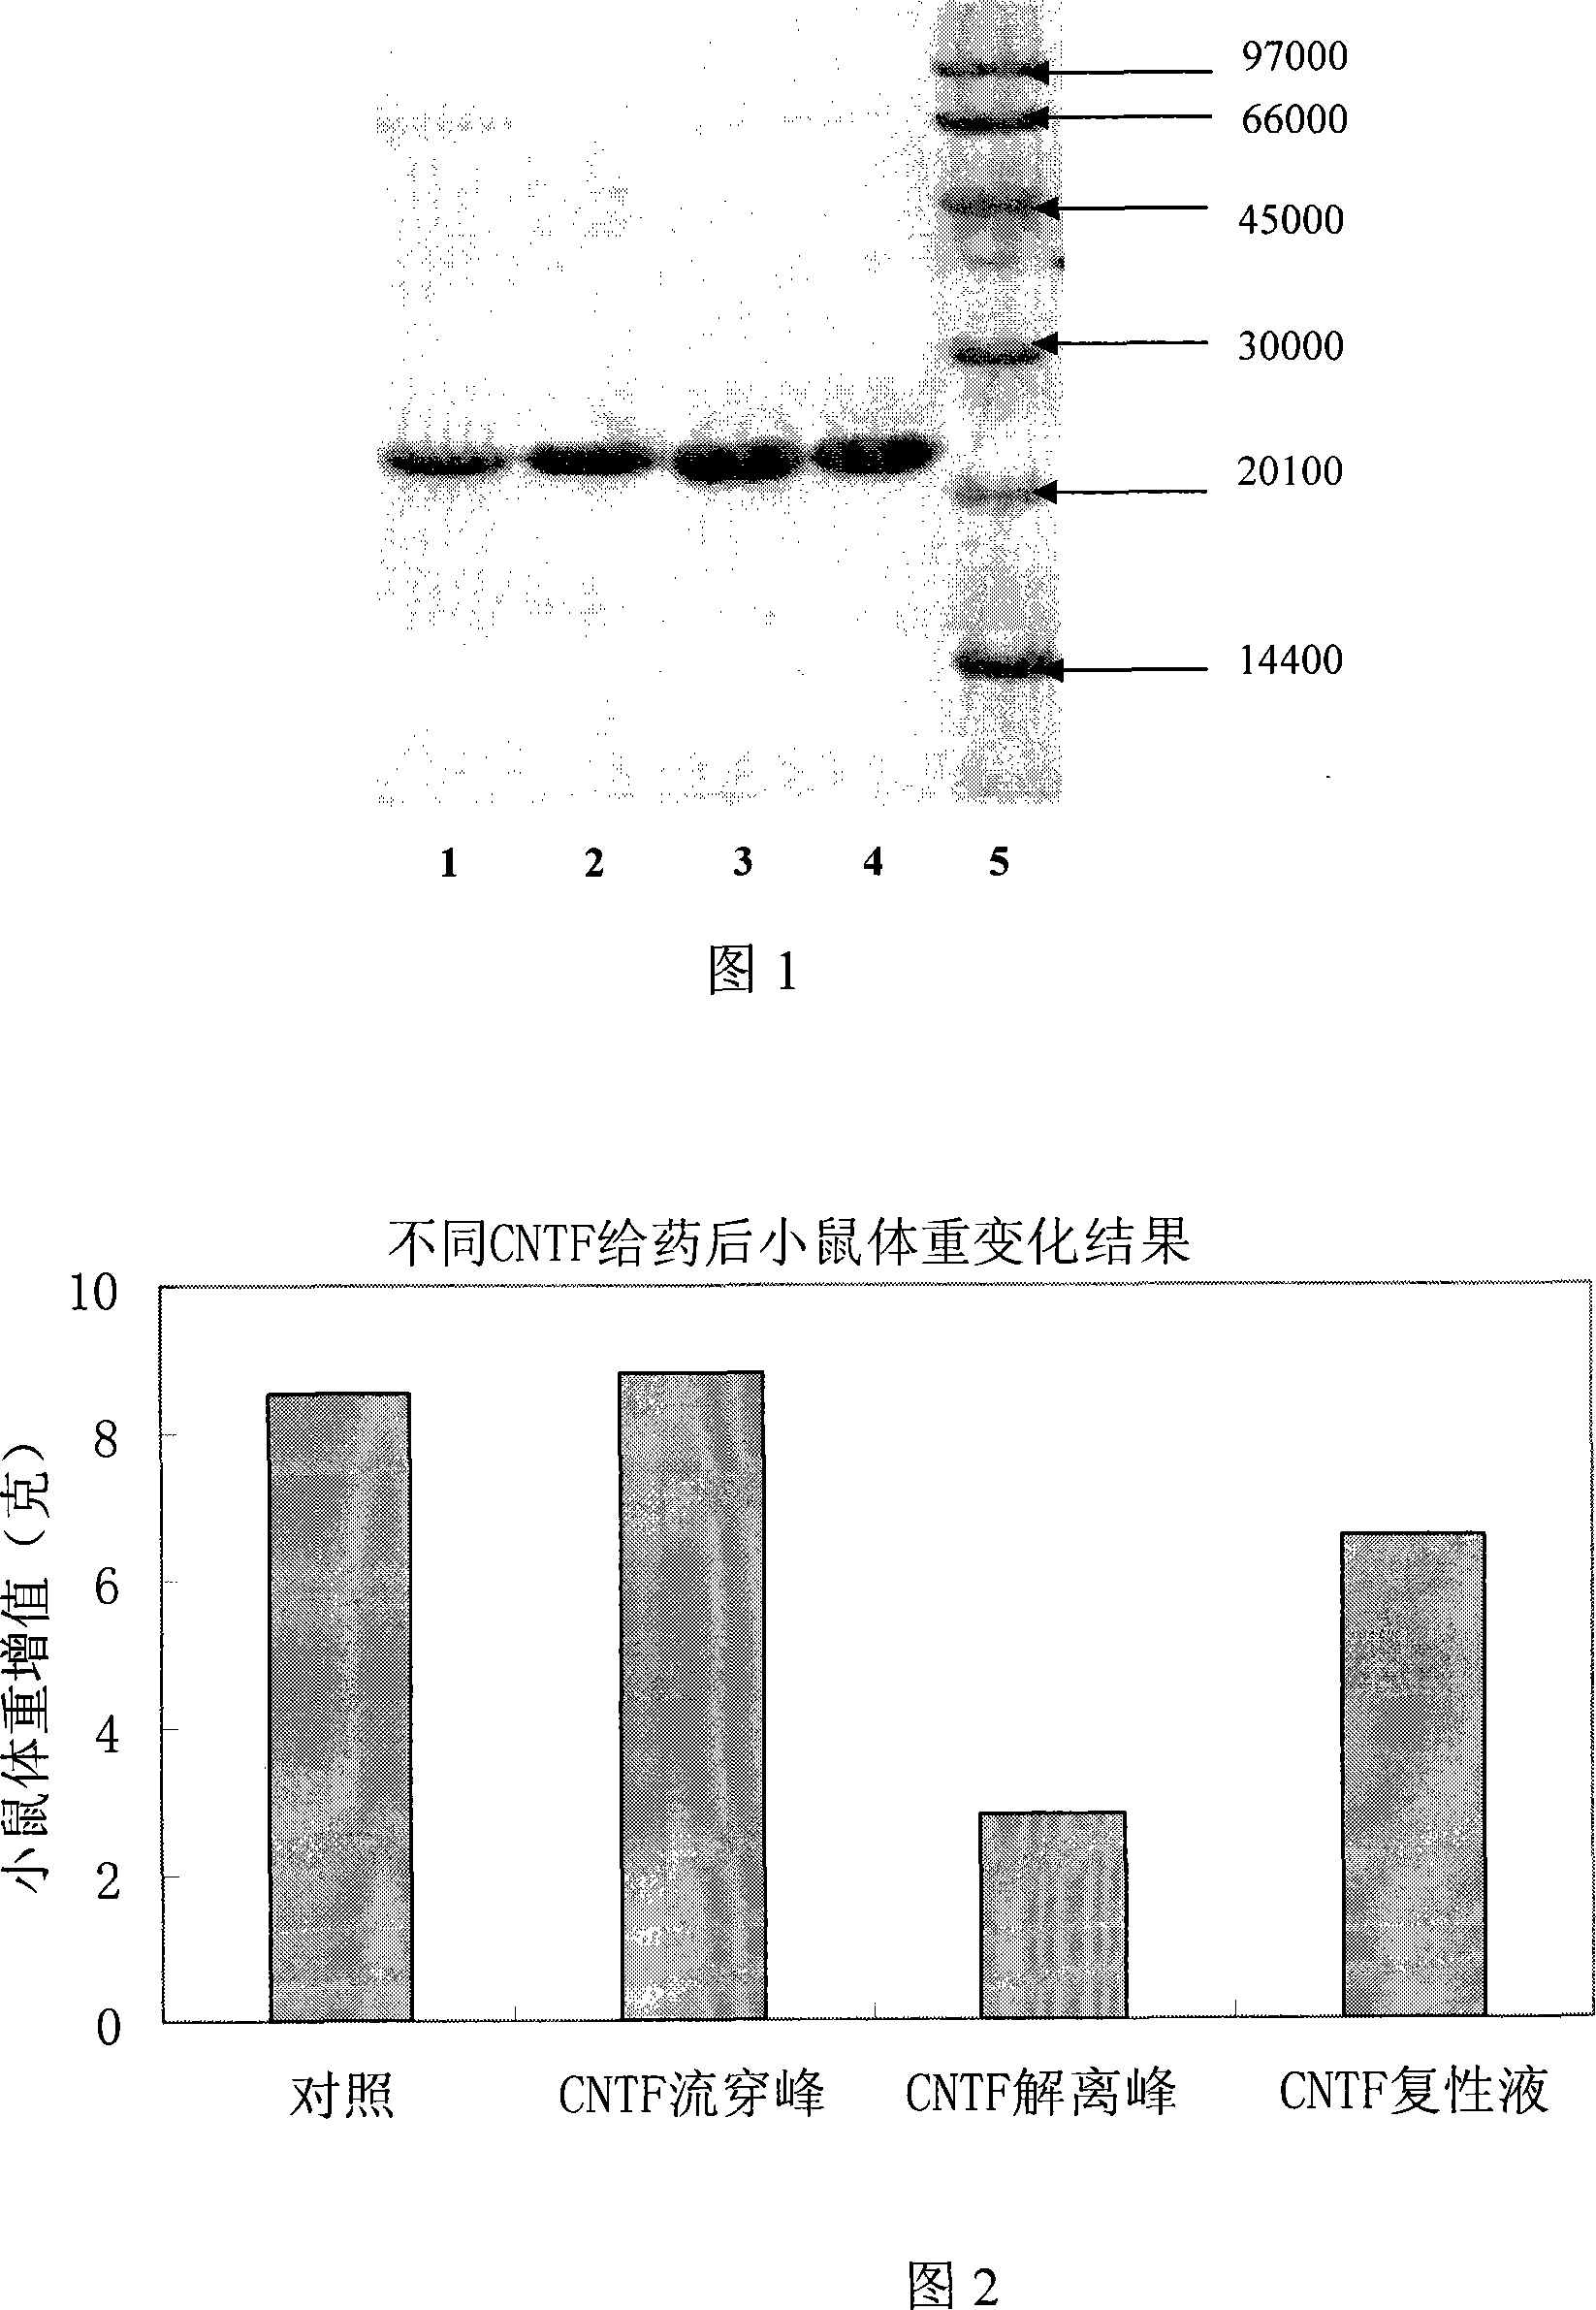 Method for separating isomerism protein from recombinant human ciliary neurotrophy factor and its mutant